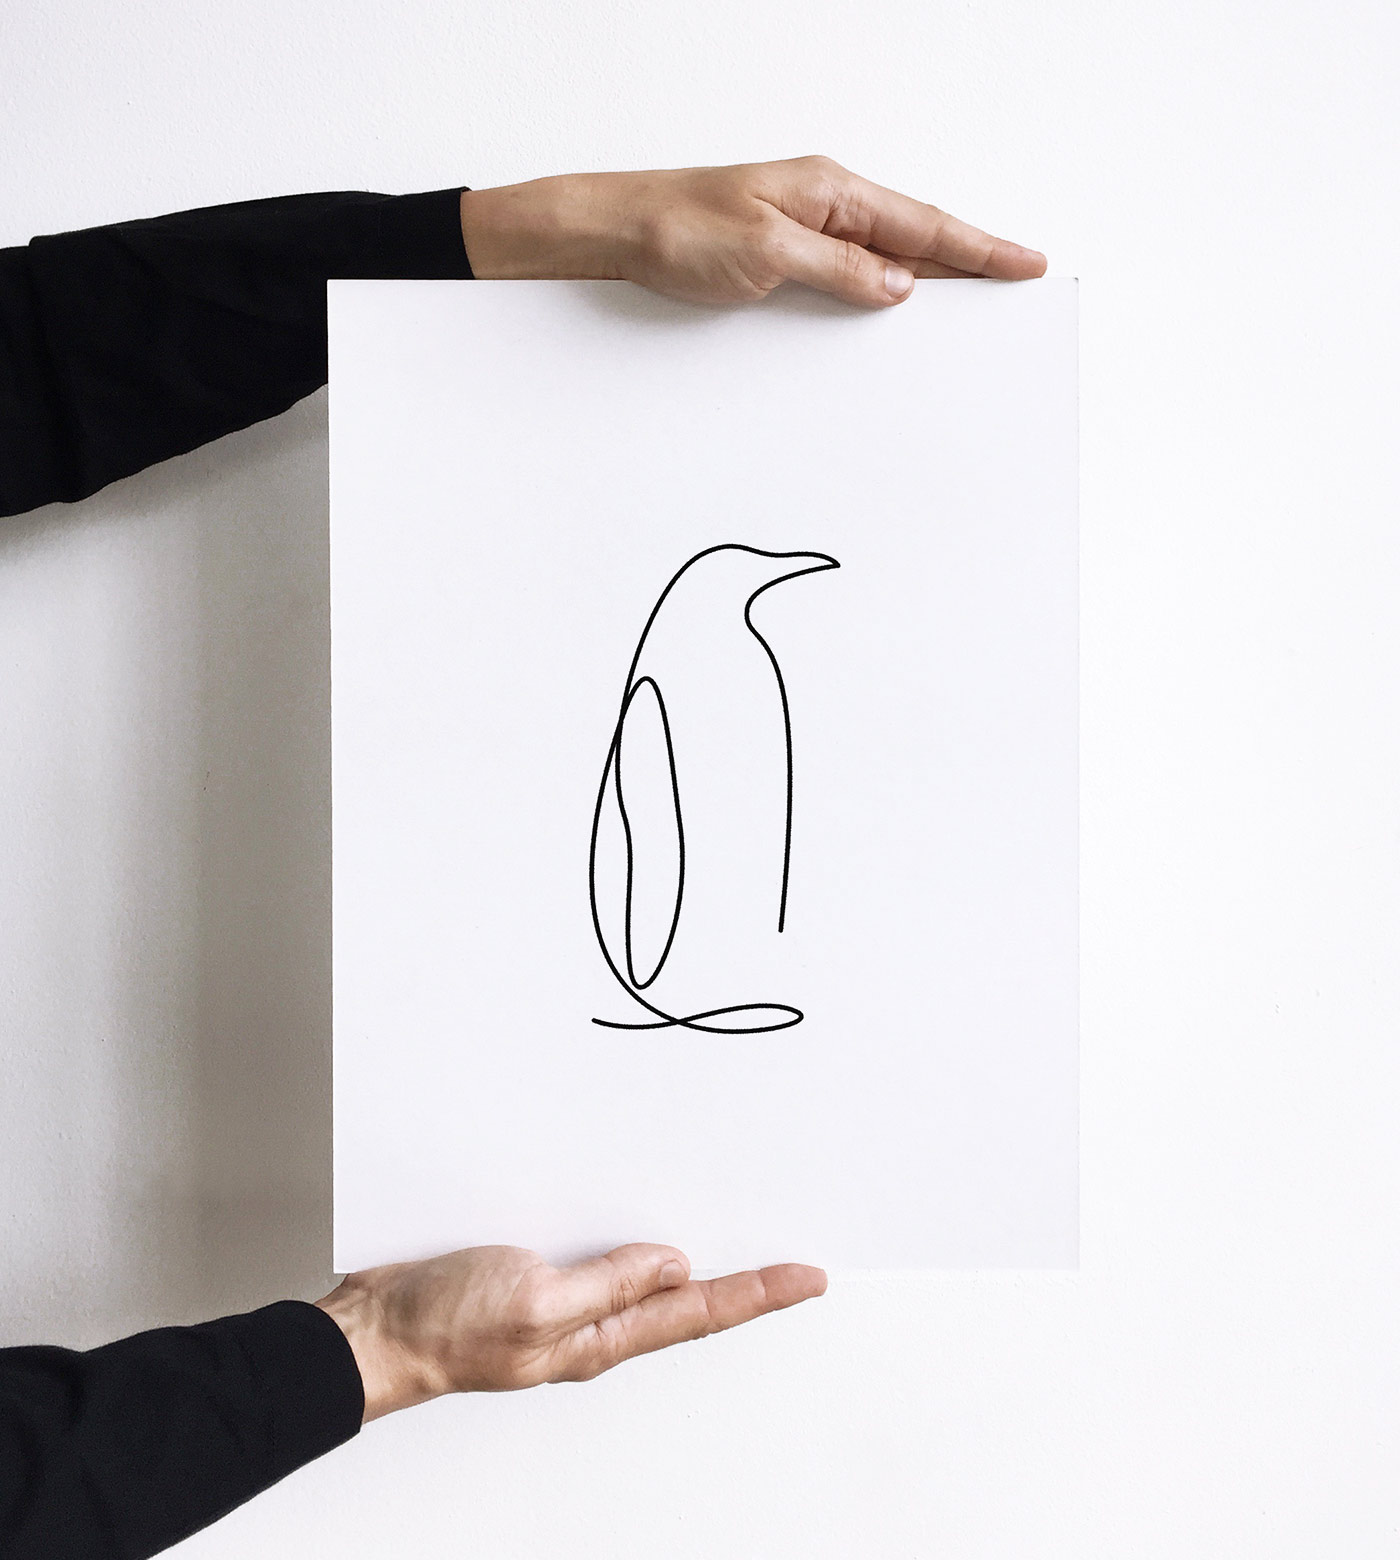 One Line Drawing by Abinaya Selvanathan on Dribbble